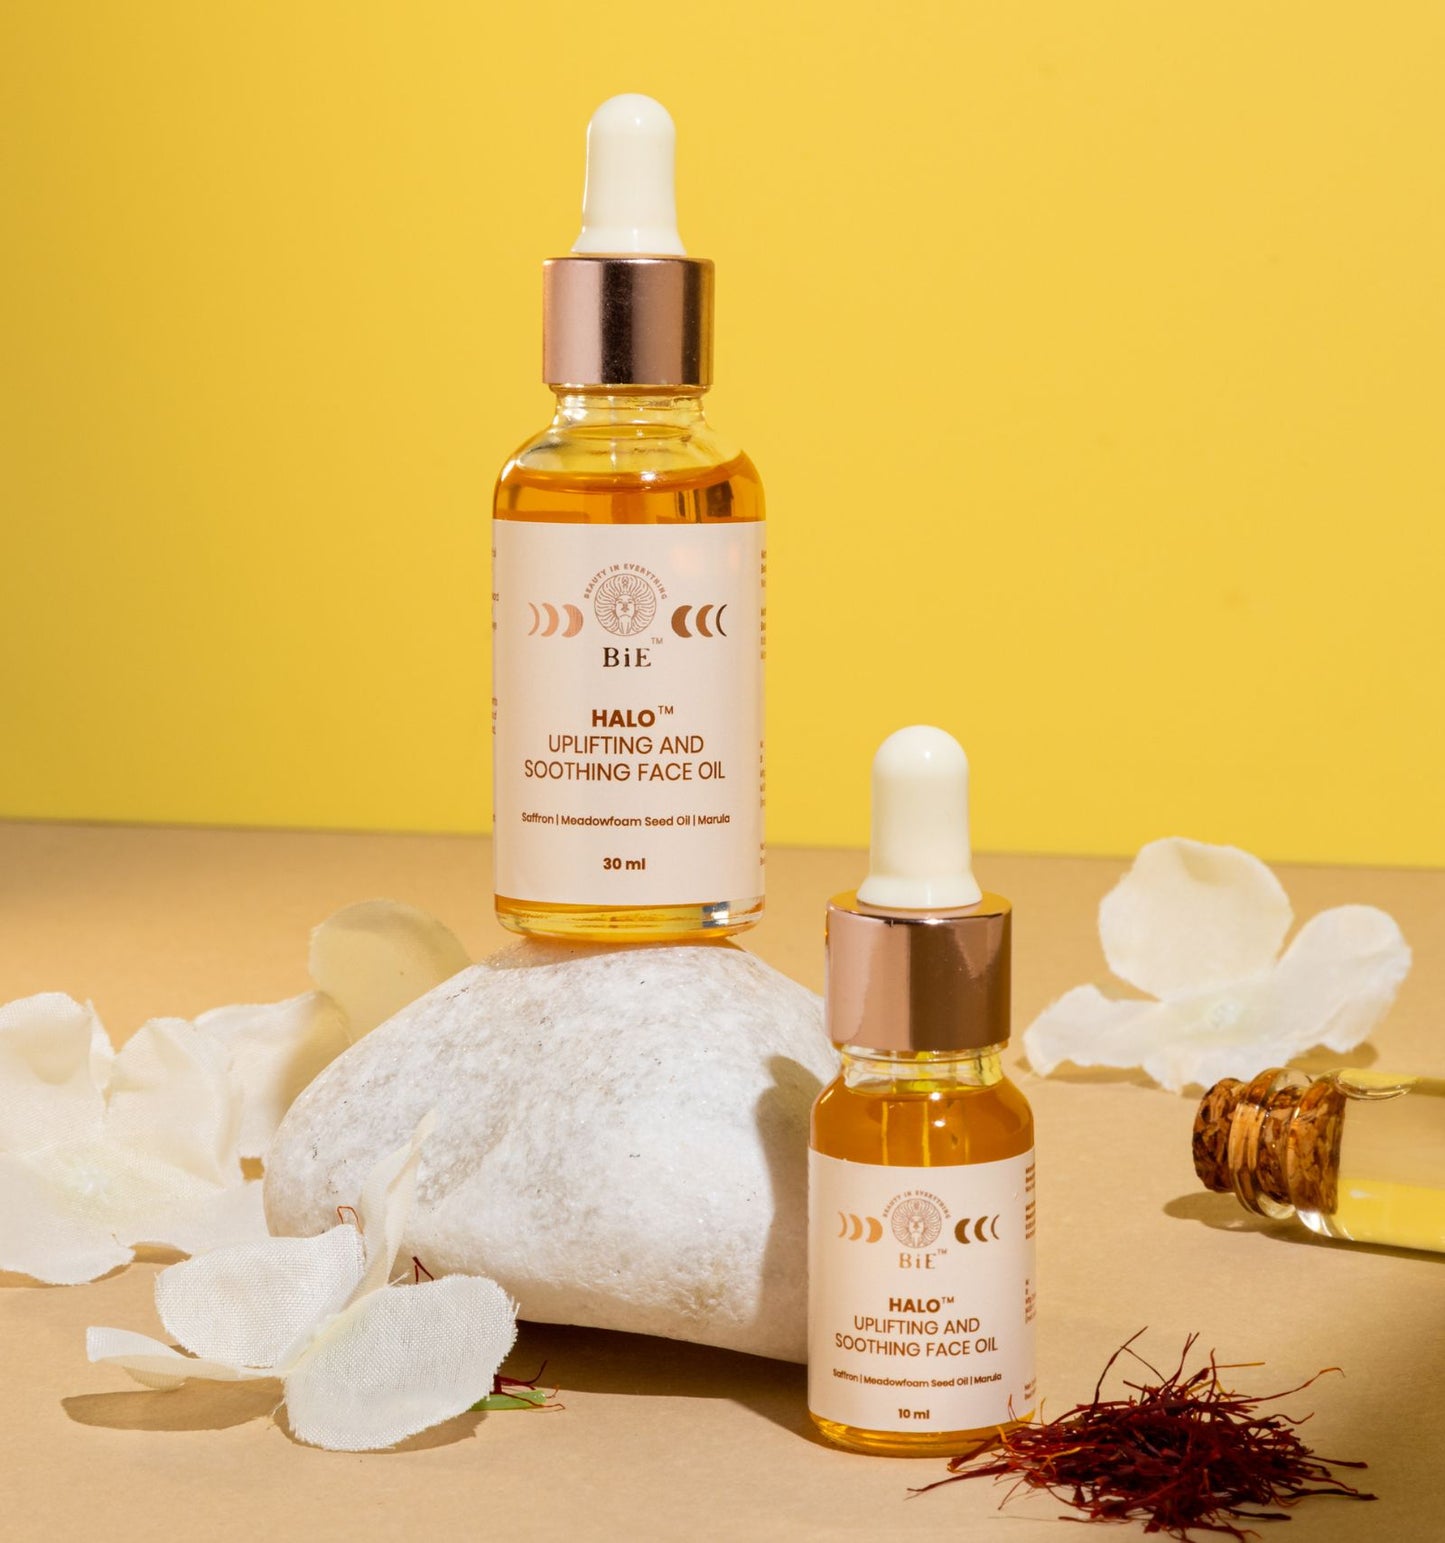 Halo- Uplifting & Soothing Face Oil